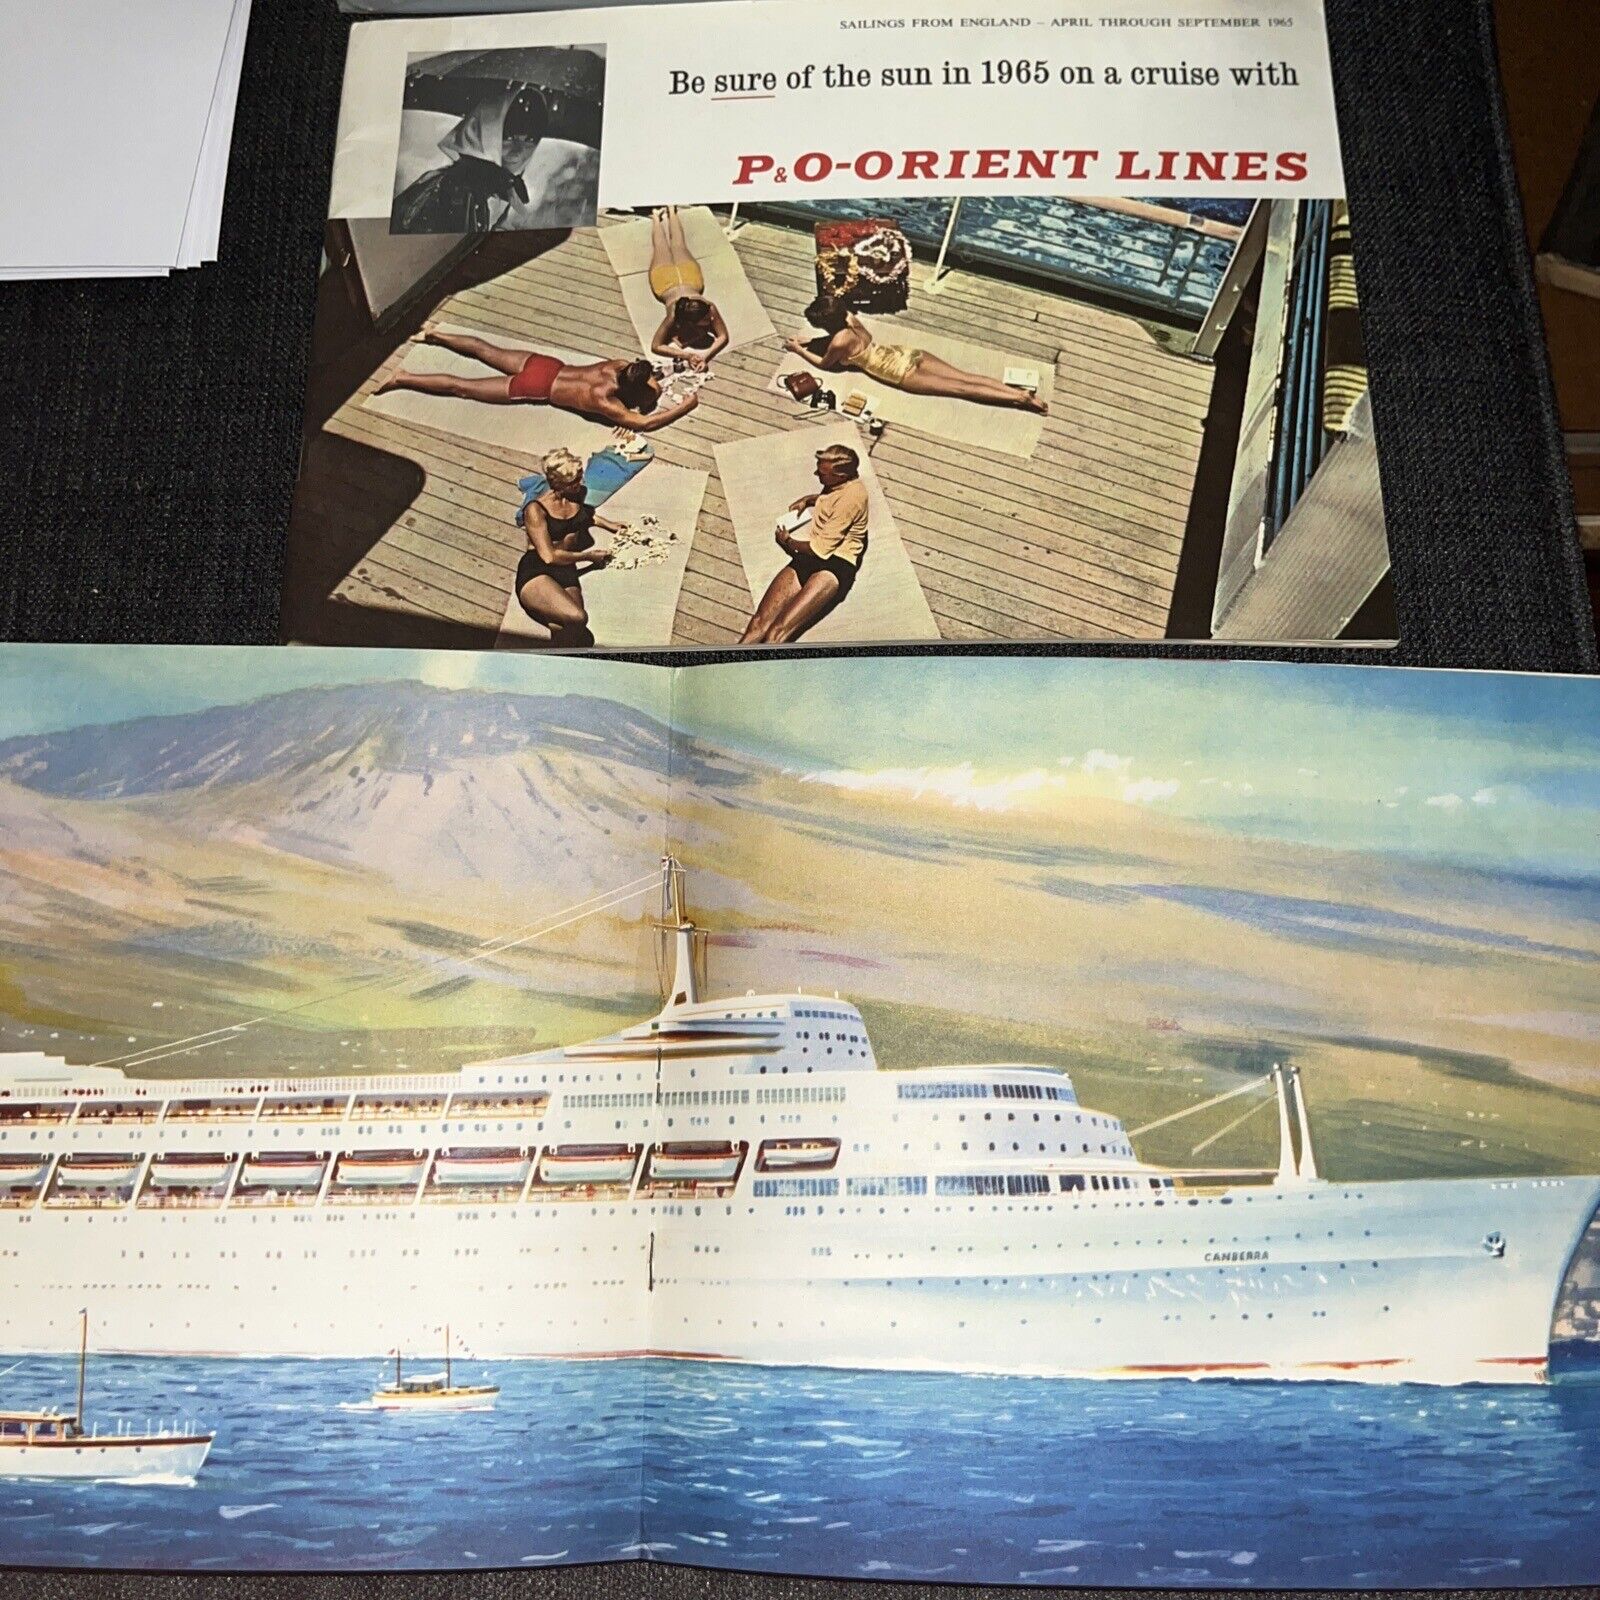 2 Vintage P&O Orient Lines Sailing Schedule Advertisements Canberra Cruise 1965